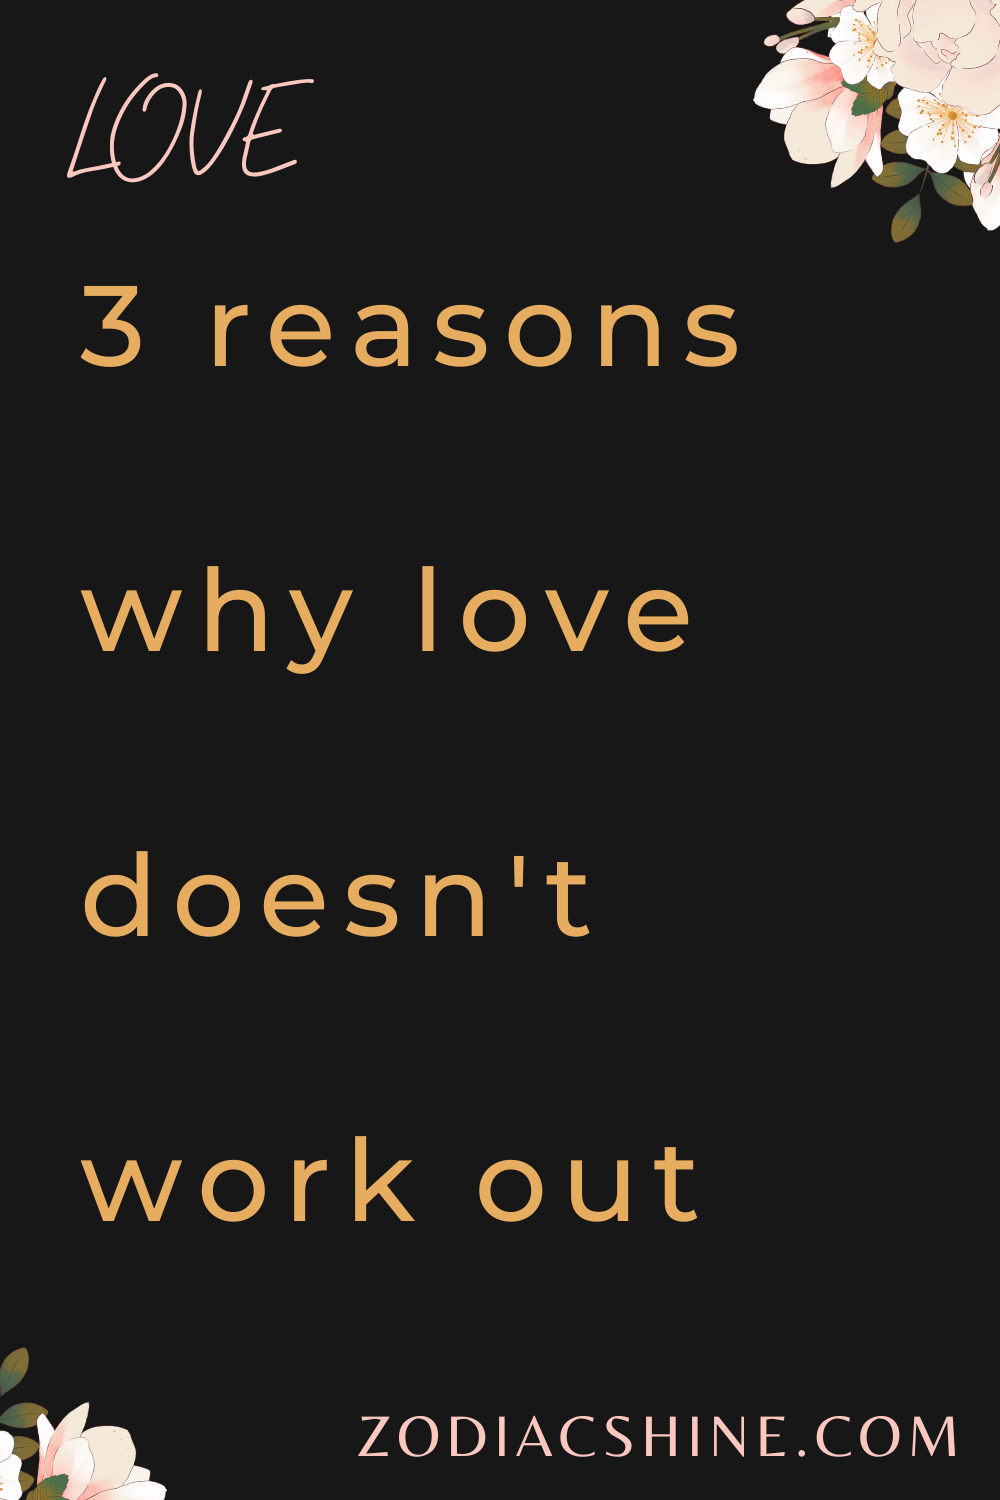 3 reasons why love doesn't work out